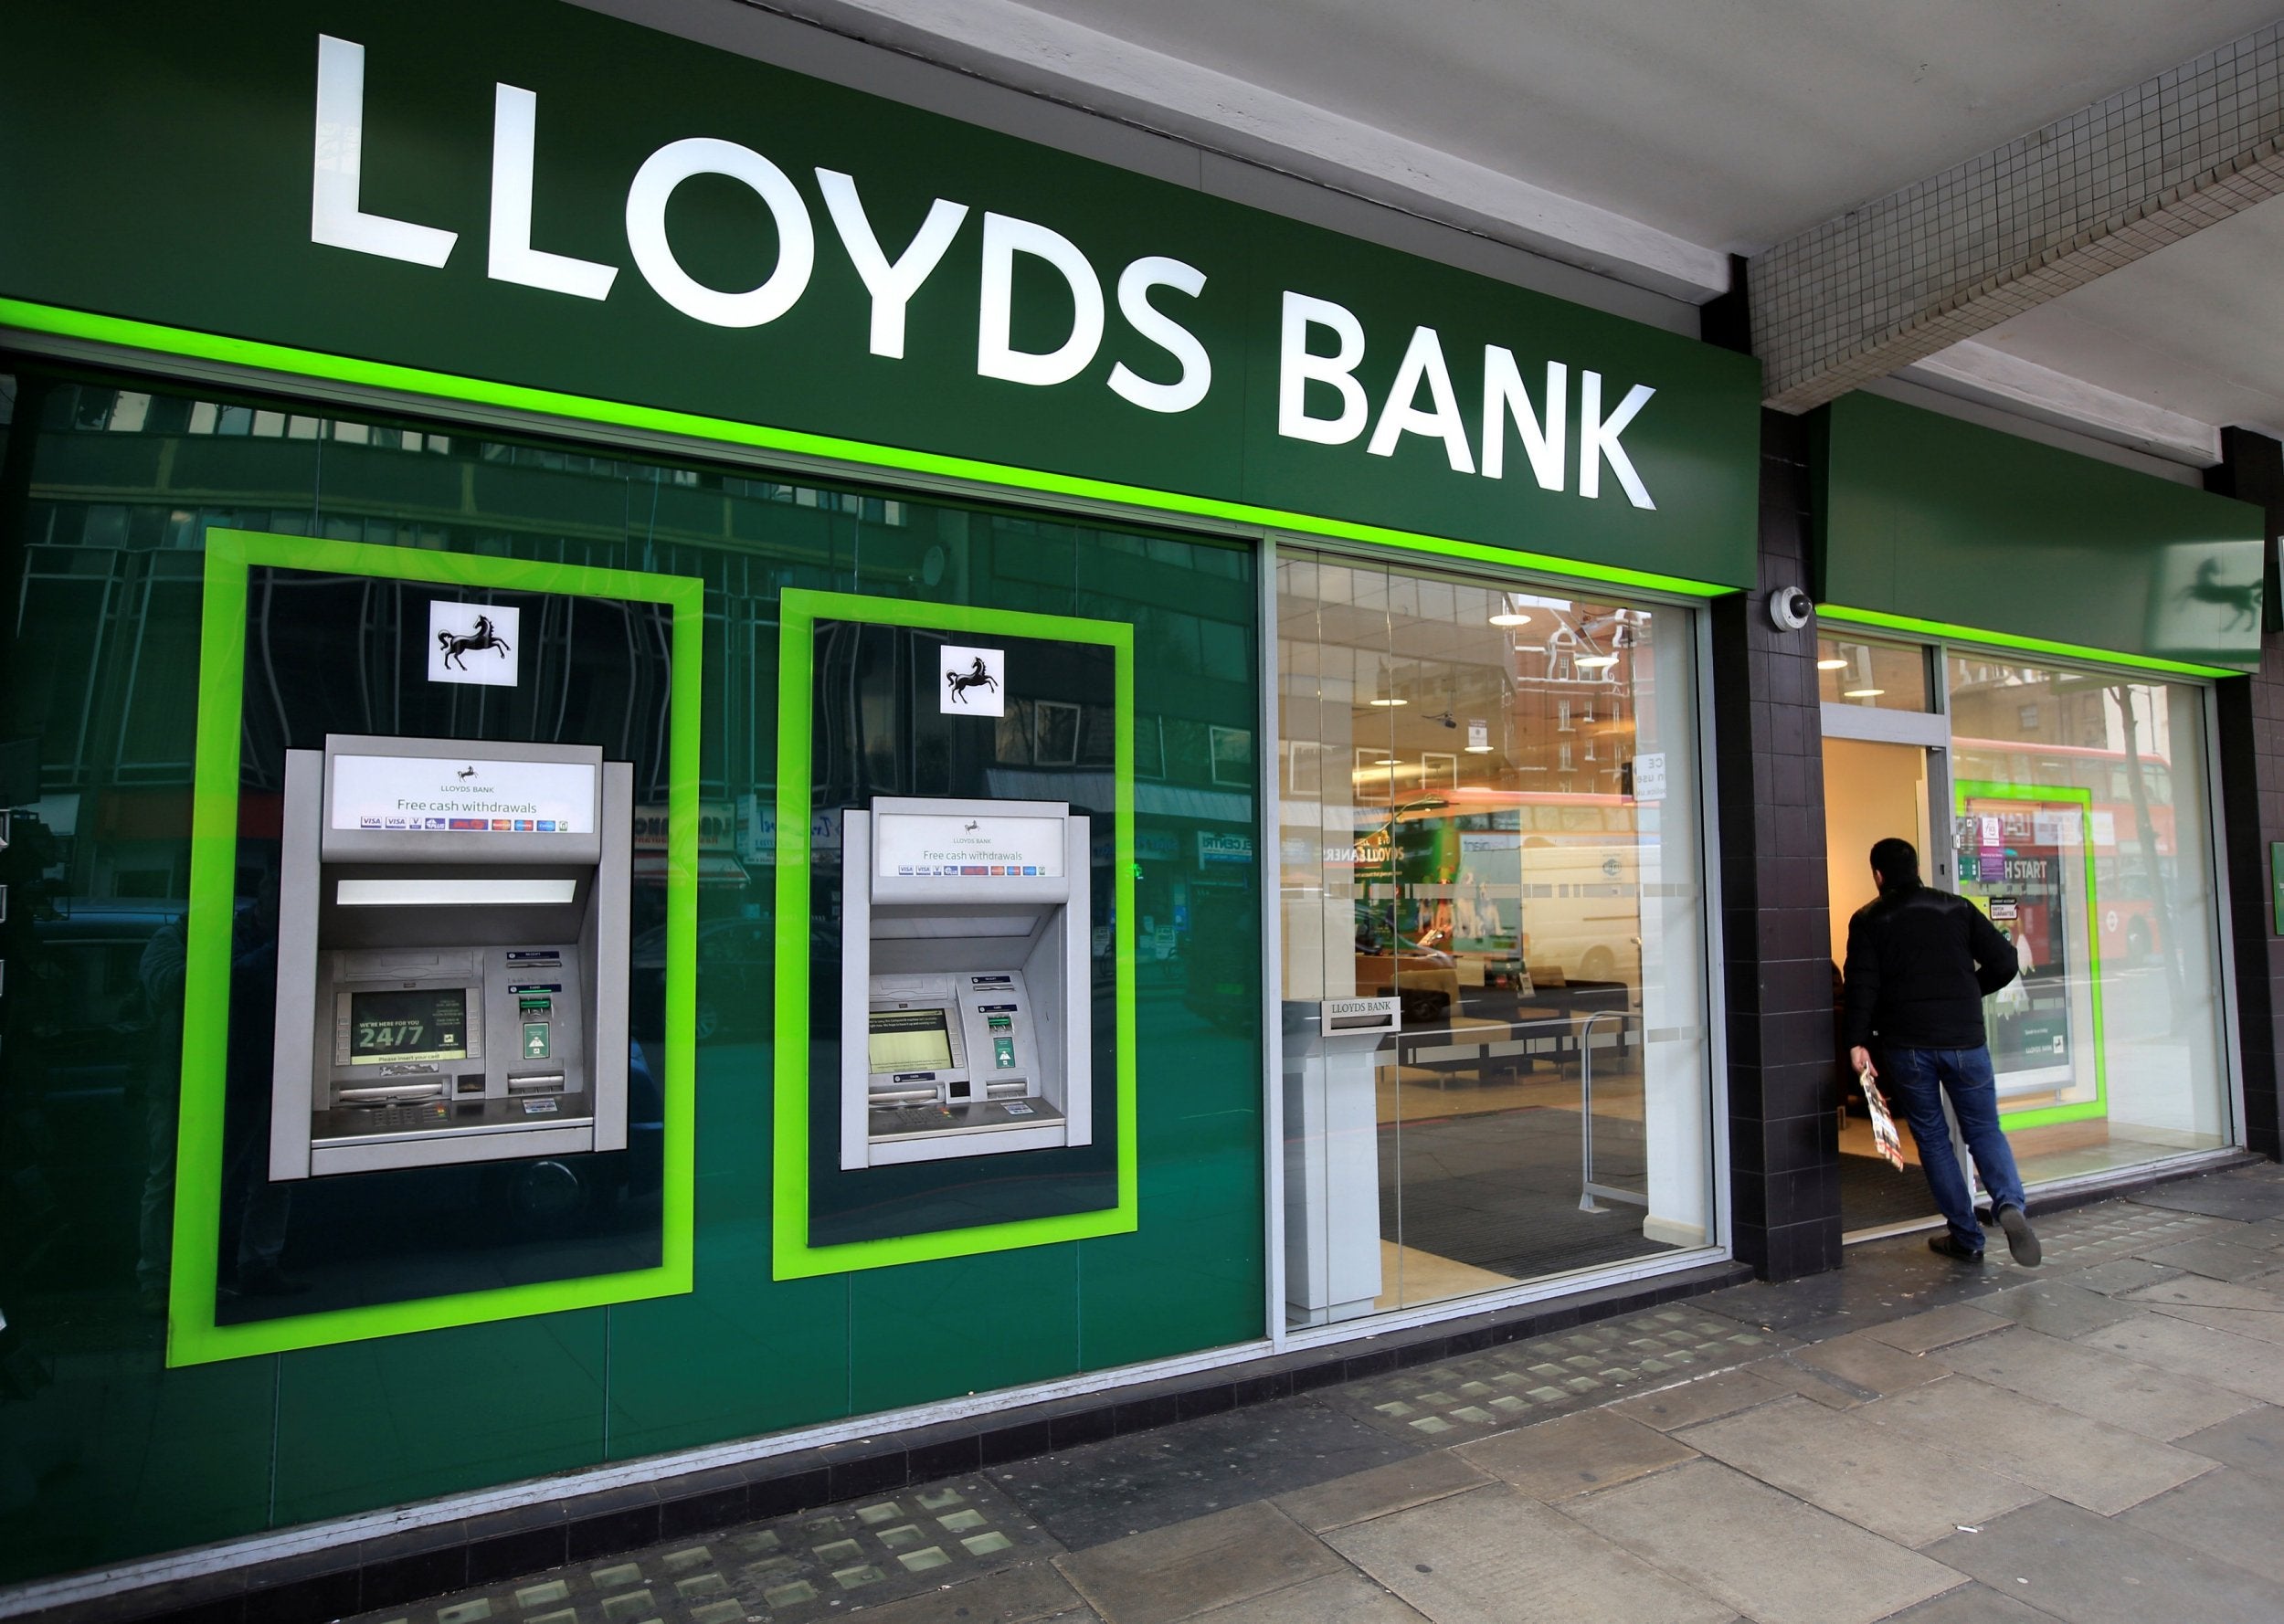 Lloyds Banking Group has announced another £.8bn PPI provision